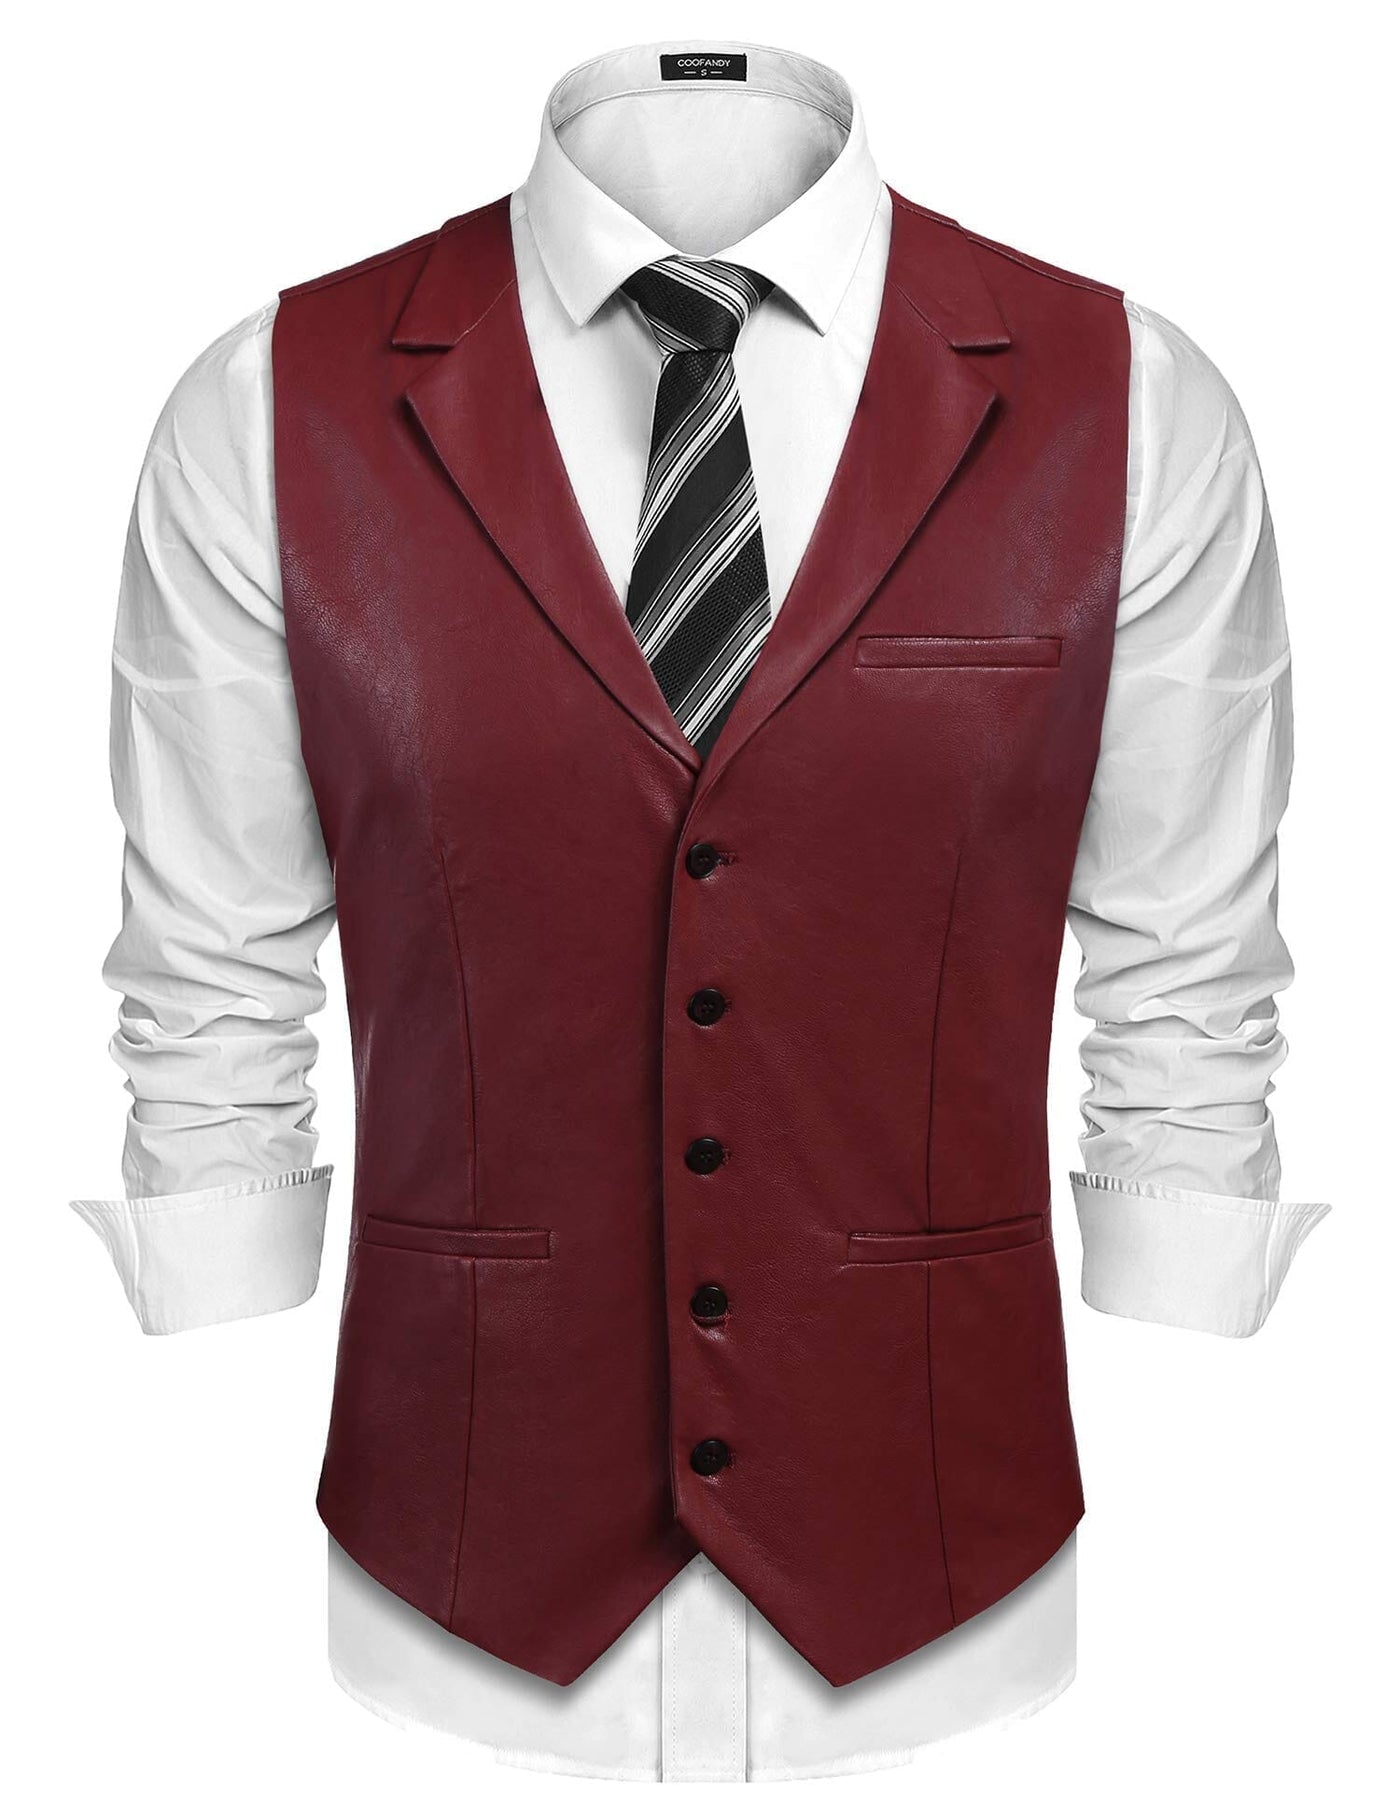 Coofandy Leather Vest (US Only) Vest coofandy Wine Red S 